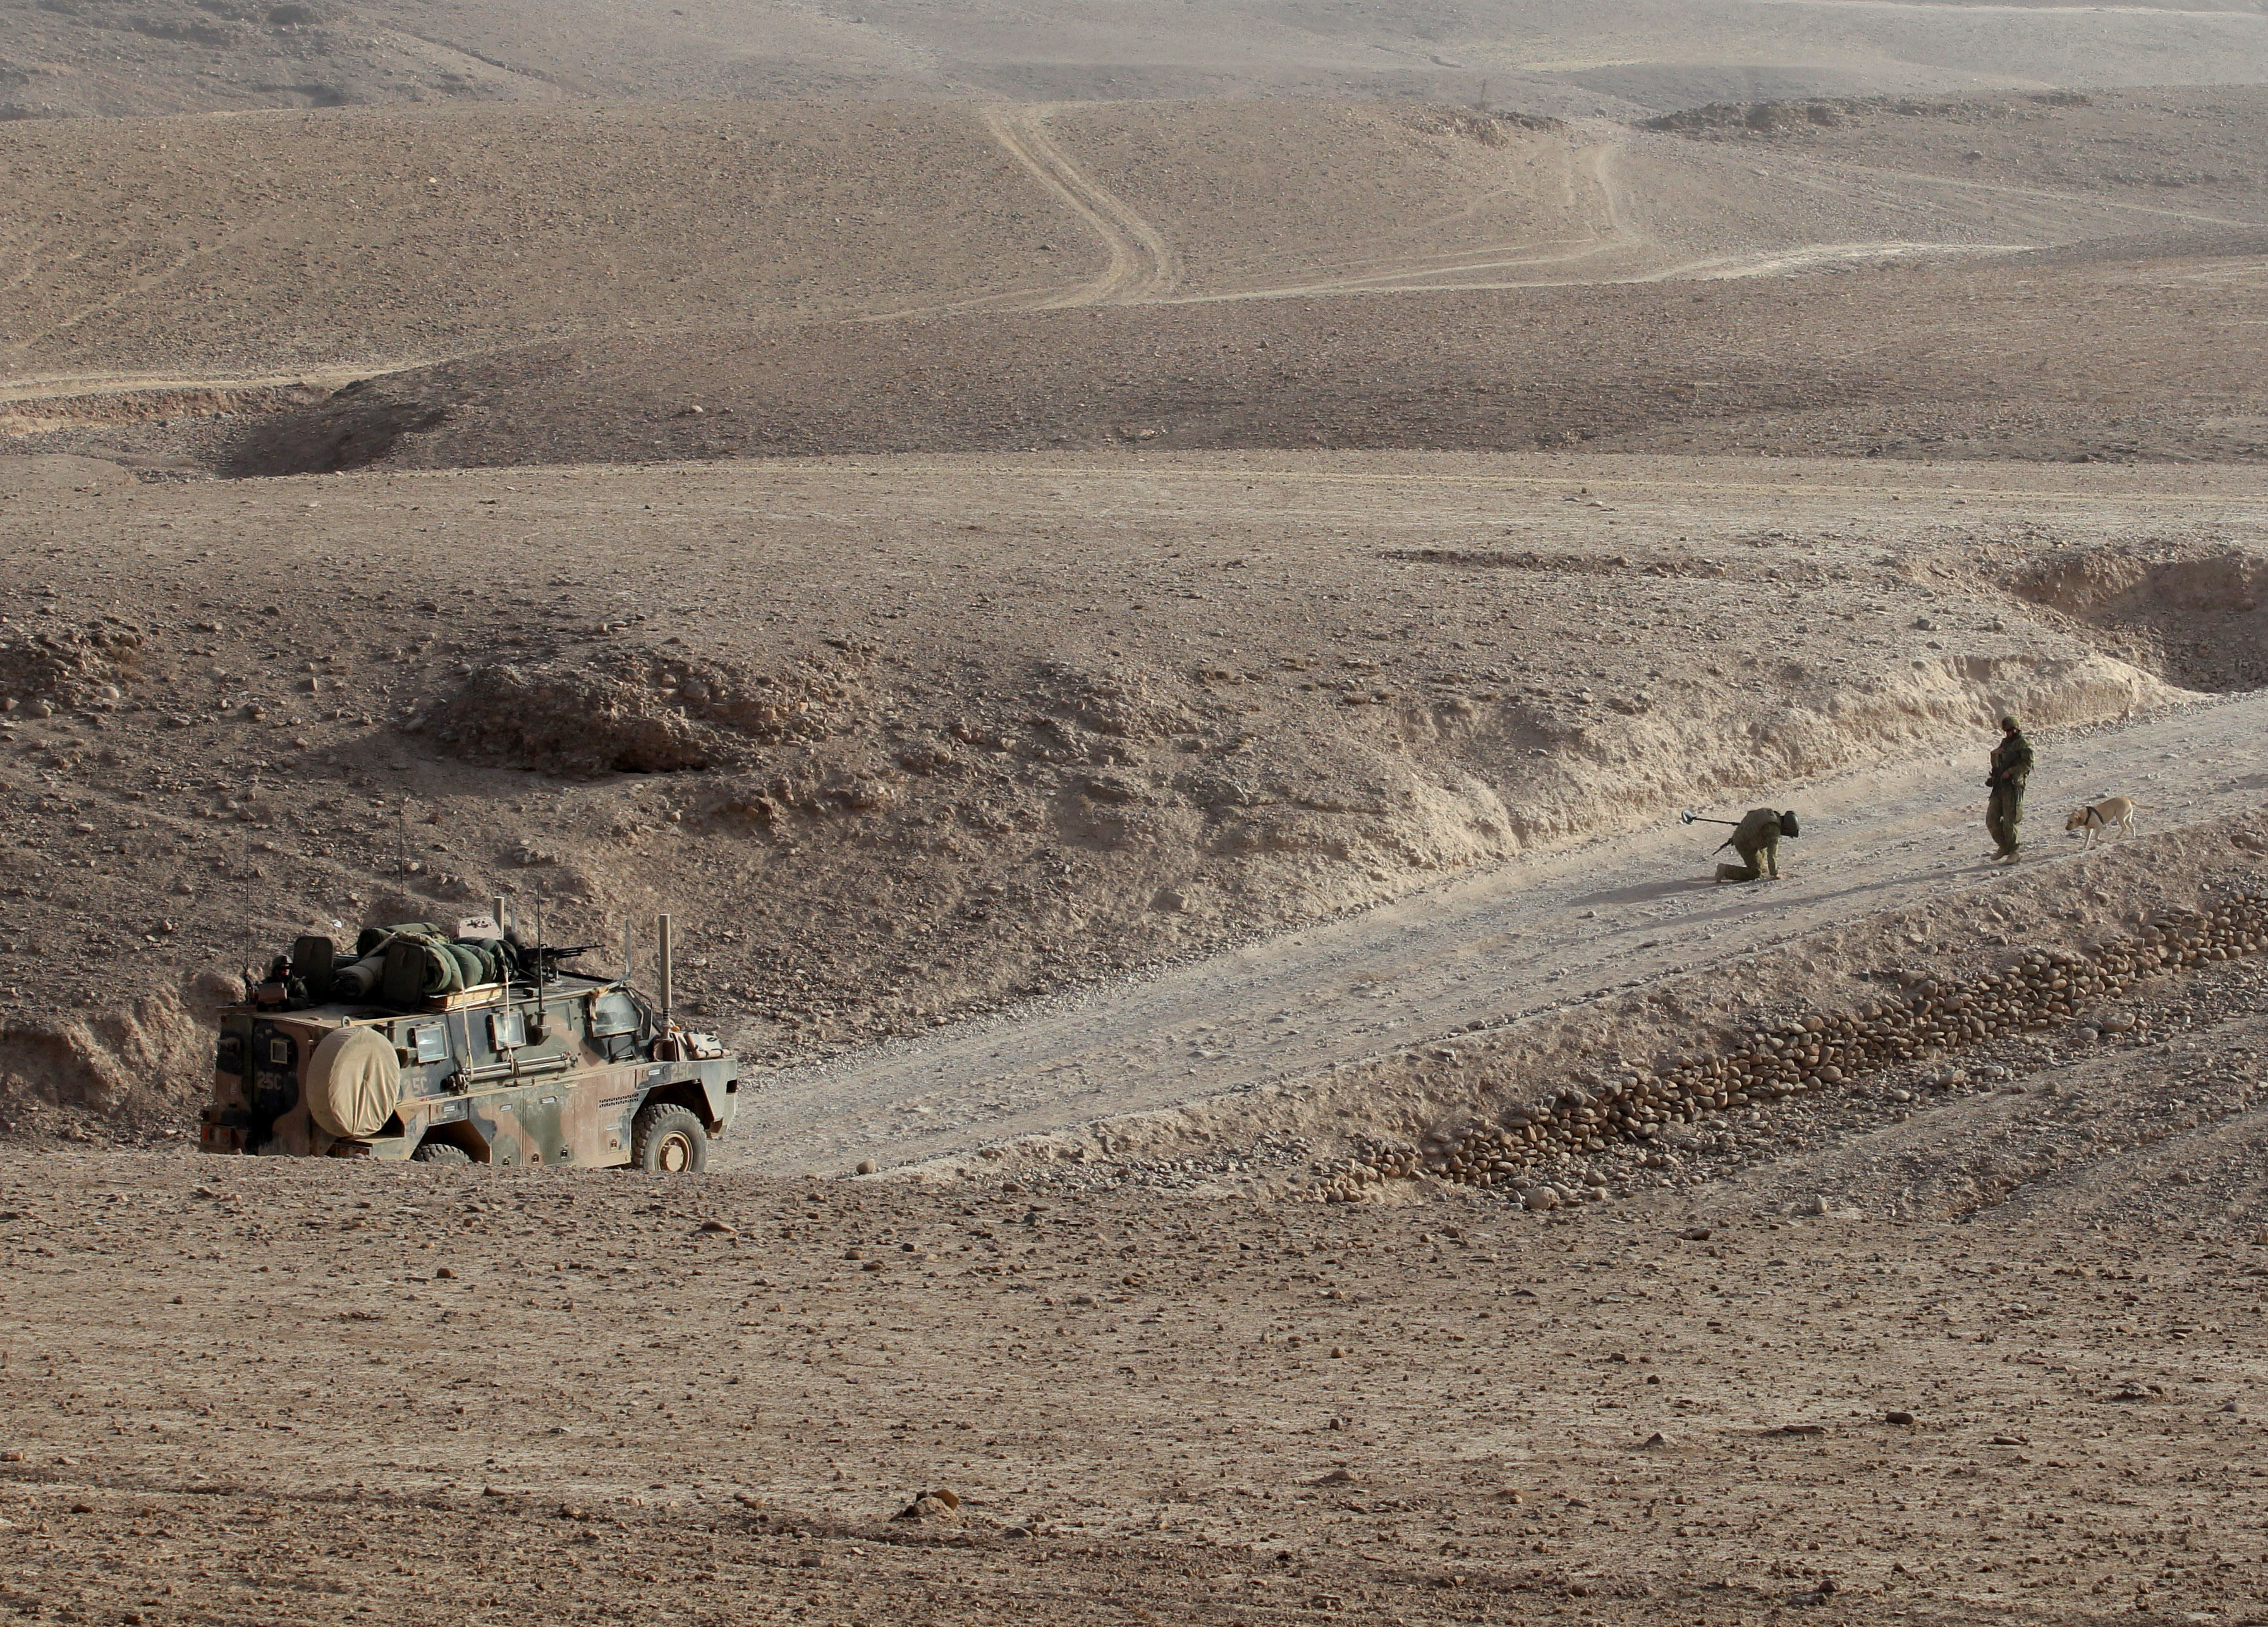 Australian soldiers check for improvised explosive devices whilst convoying in the Bushmaster vehicles from Tarin Kowt to the Miribad Valley in Uruzgan Province, Afghanistan.